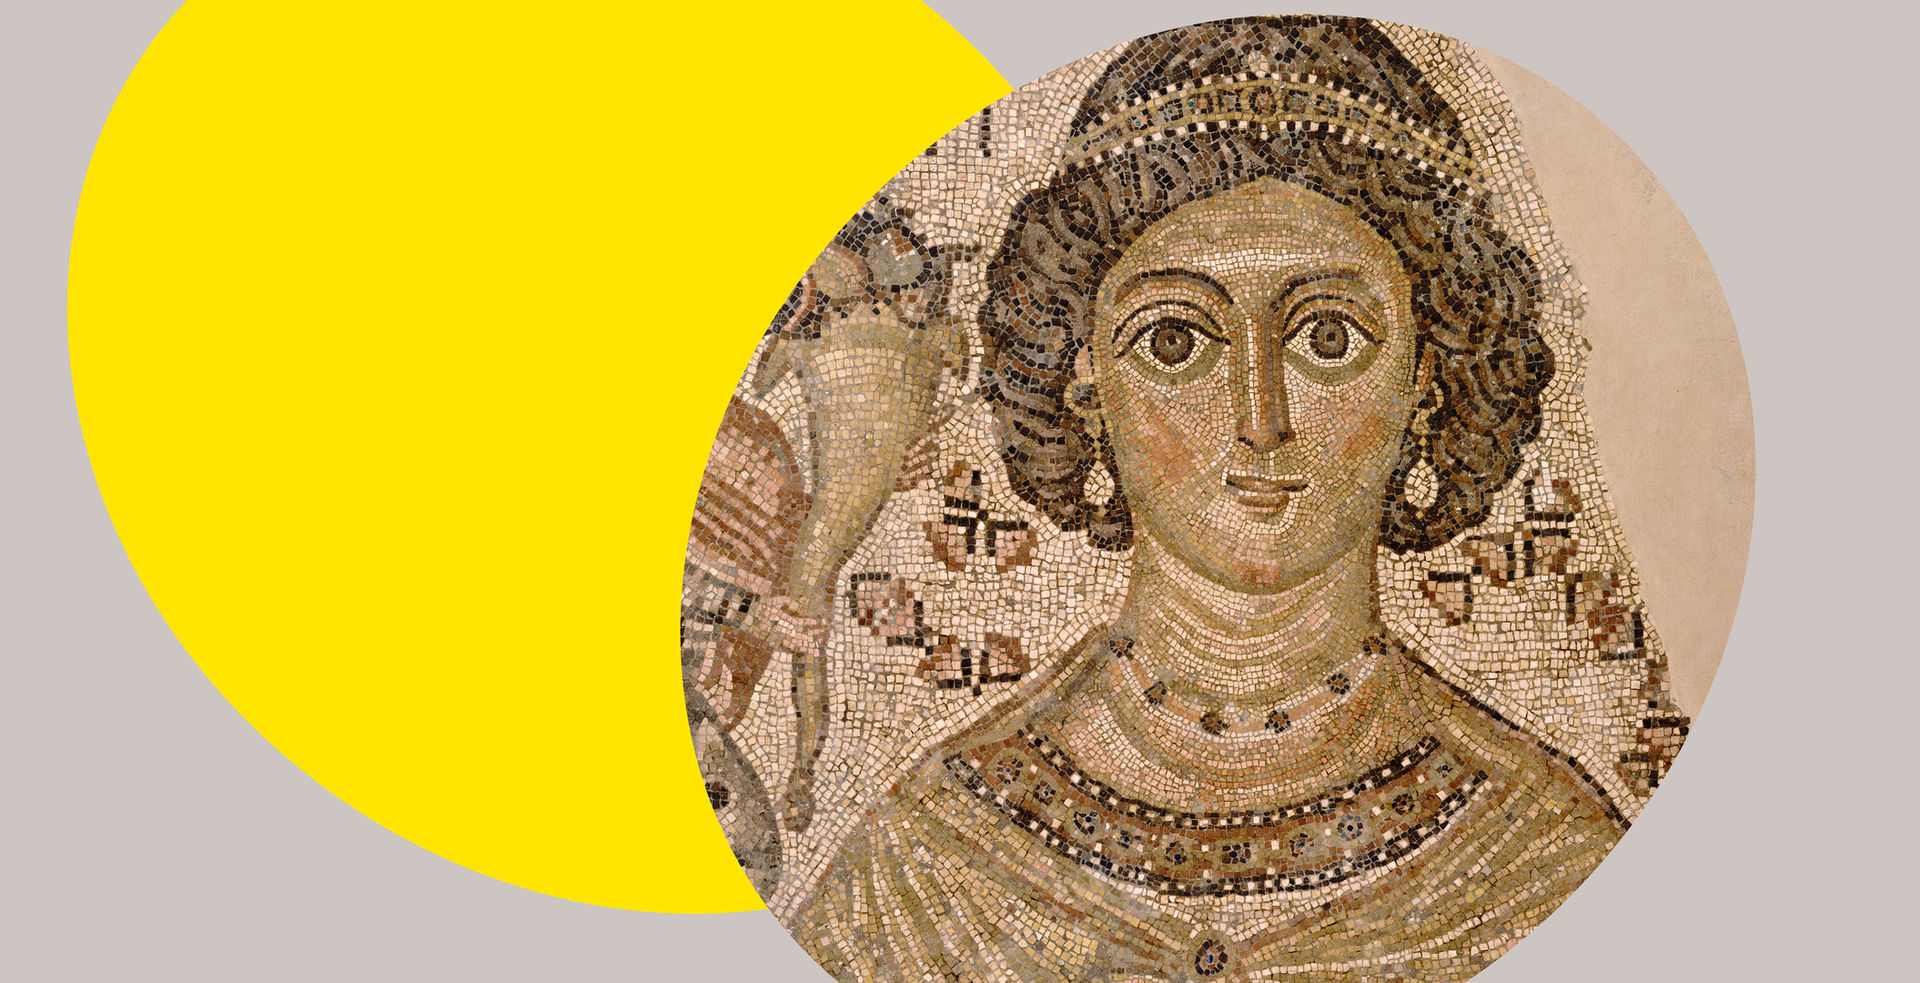 Brown and beige fragment of a floor mosaic with a brown-skinned woman with curly brown hair, a headpiece, and earrings set against a bright yellow ovular spotlight shape in the background.